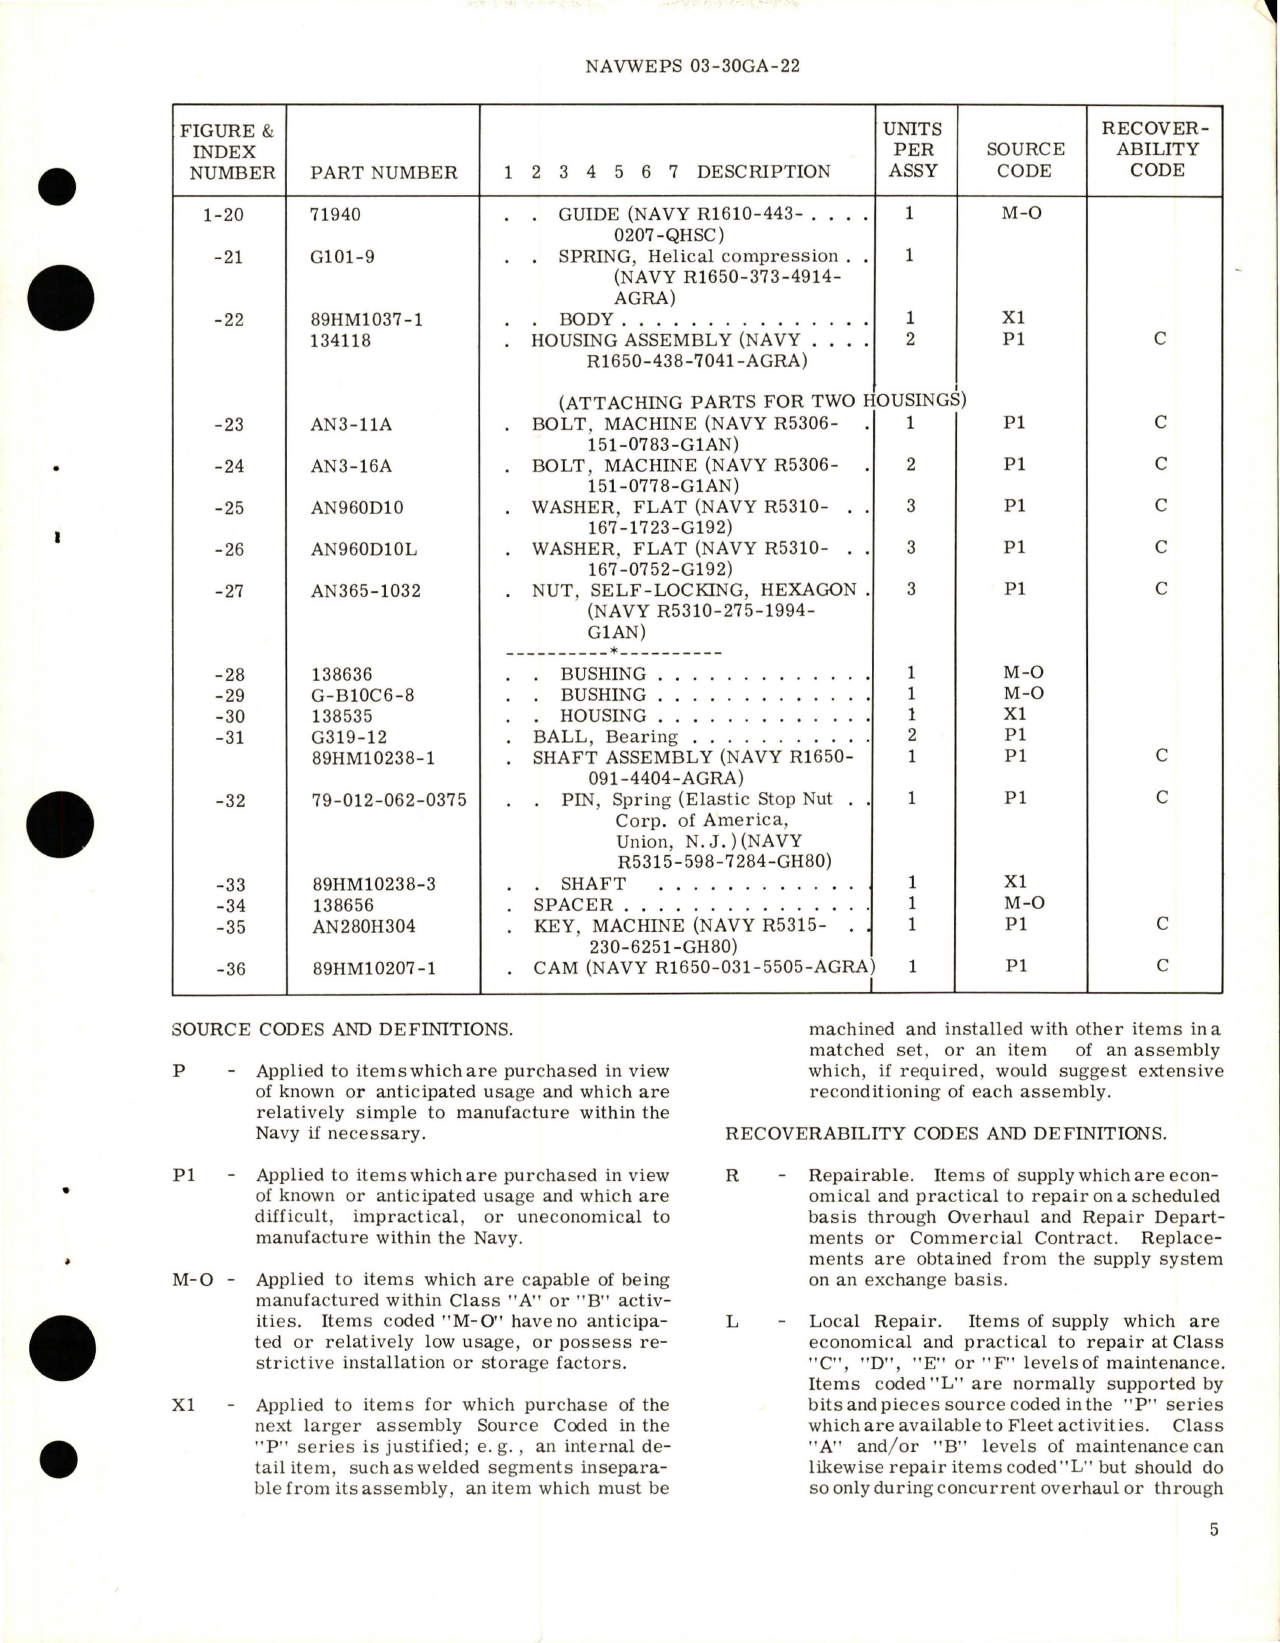 Sample page 5 from AirCorps Library document: Overhaul Instructions with Parts Breakdown for Hydraulic Wing Fold Timer Check Valve Unit Assembly - 89H1069-1 and 89H1069-3 